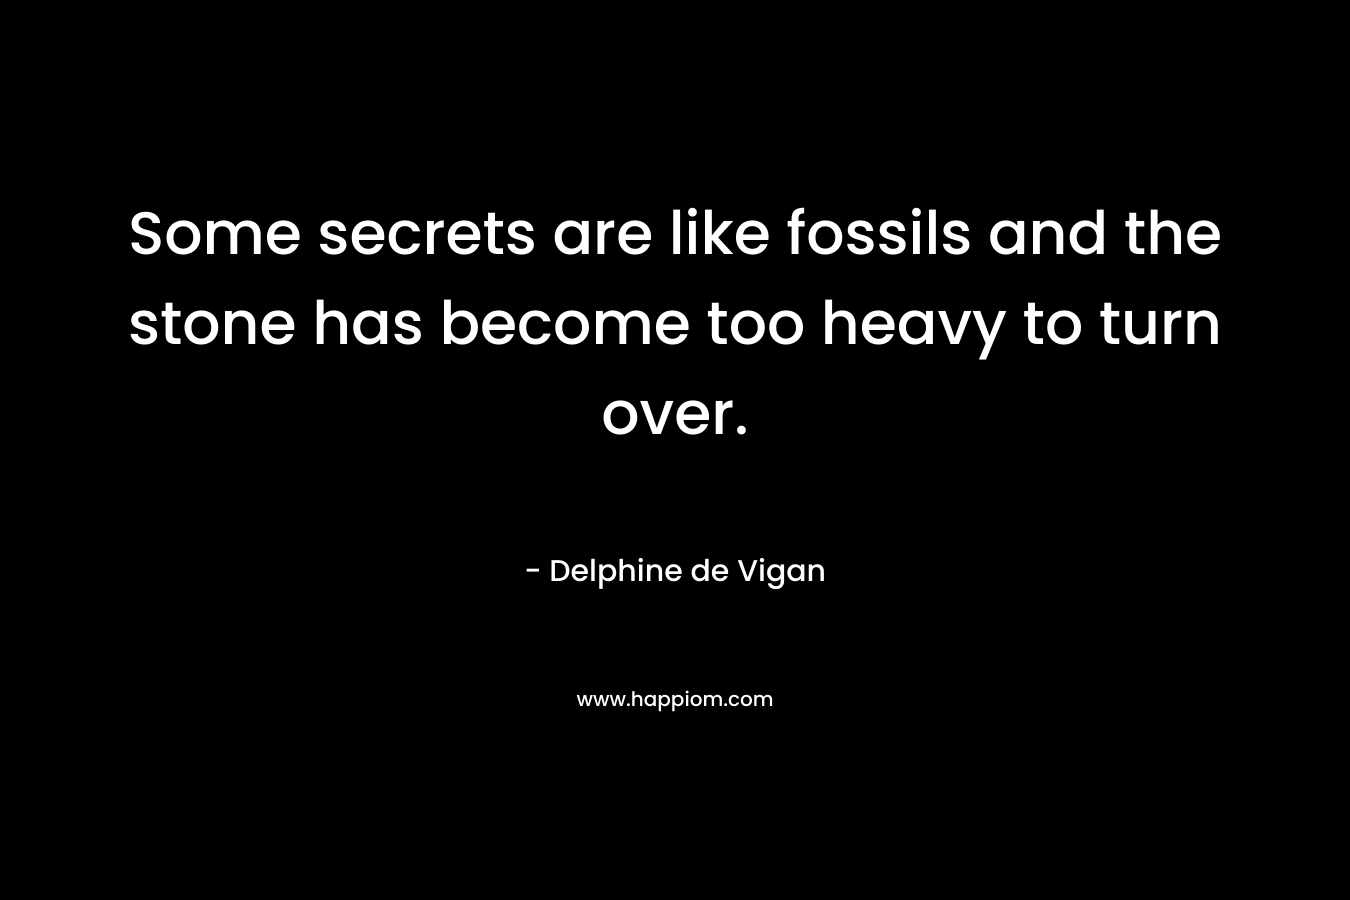 Some secrets are like fossils and the stone has become too heavy to turn over. – Delphine de Vigan